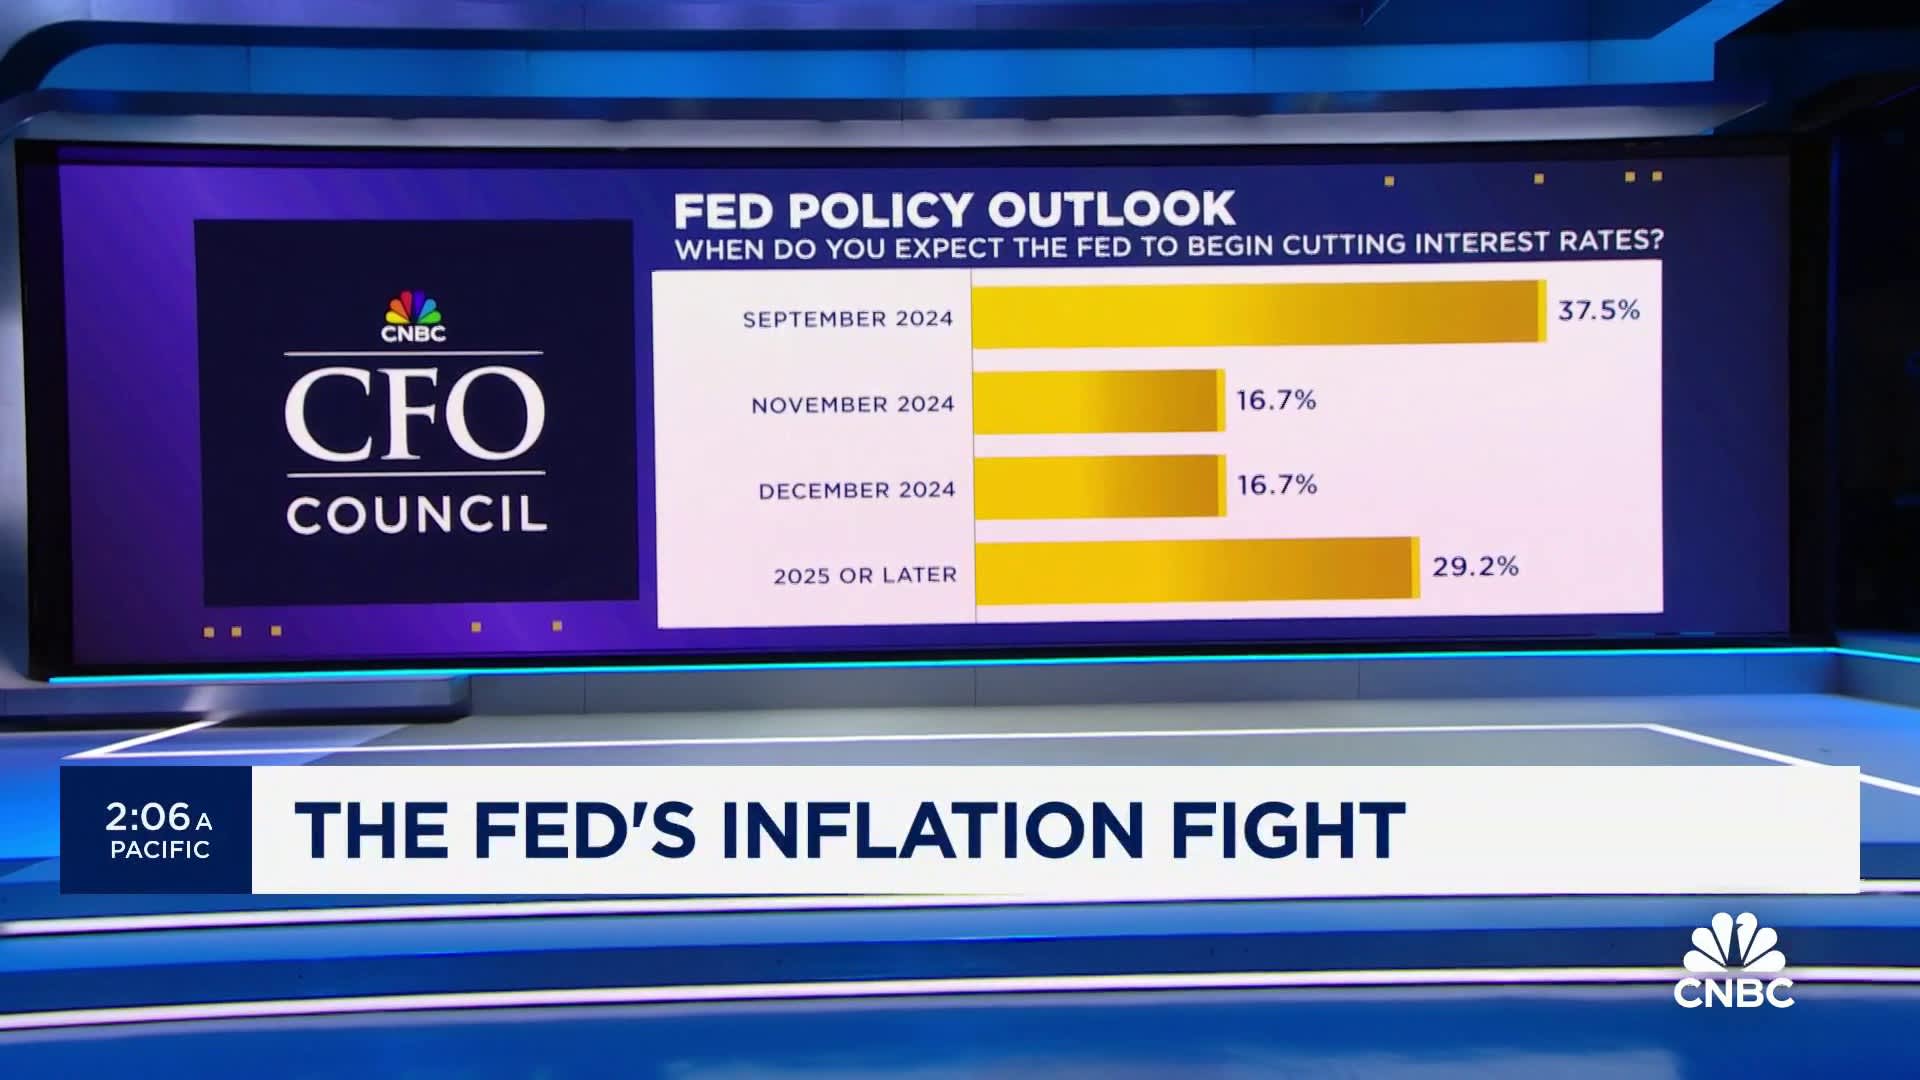 Inflation is going to remain elevated into 2026: CNBC CFO Council survey